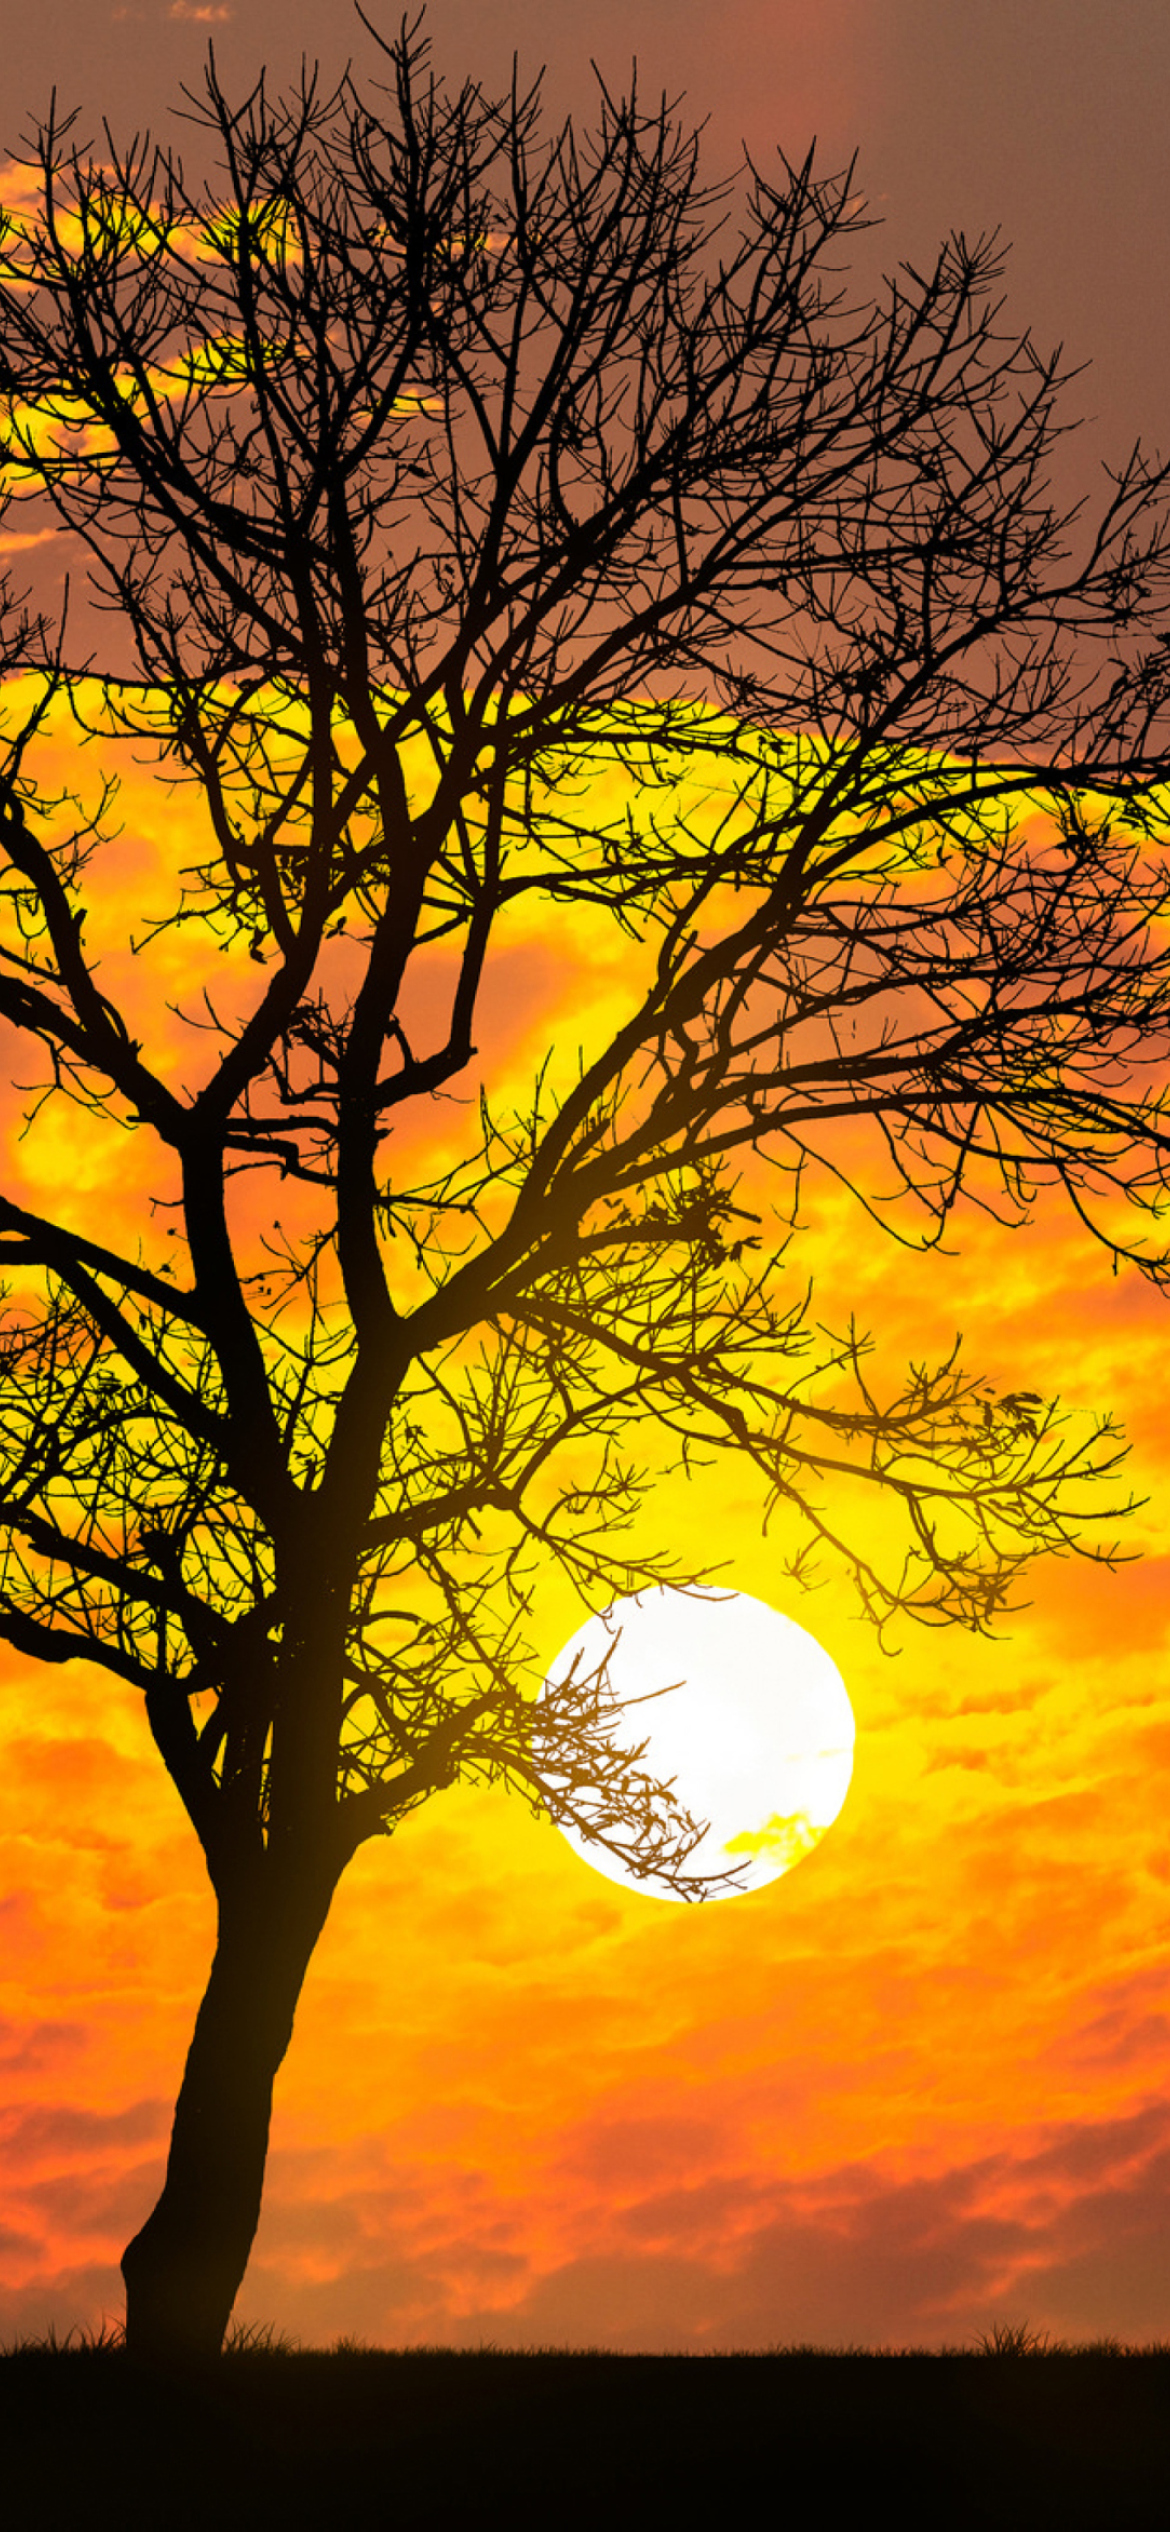 Sunset Behind Branches wallpaper 1170x2532